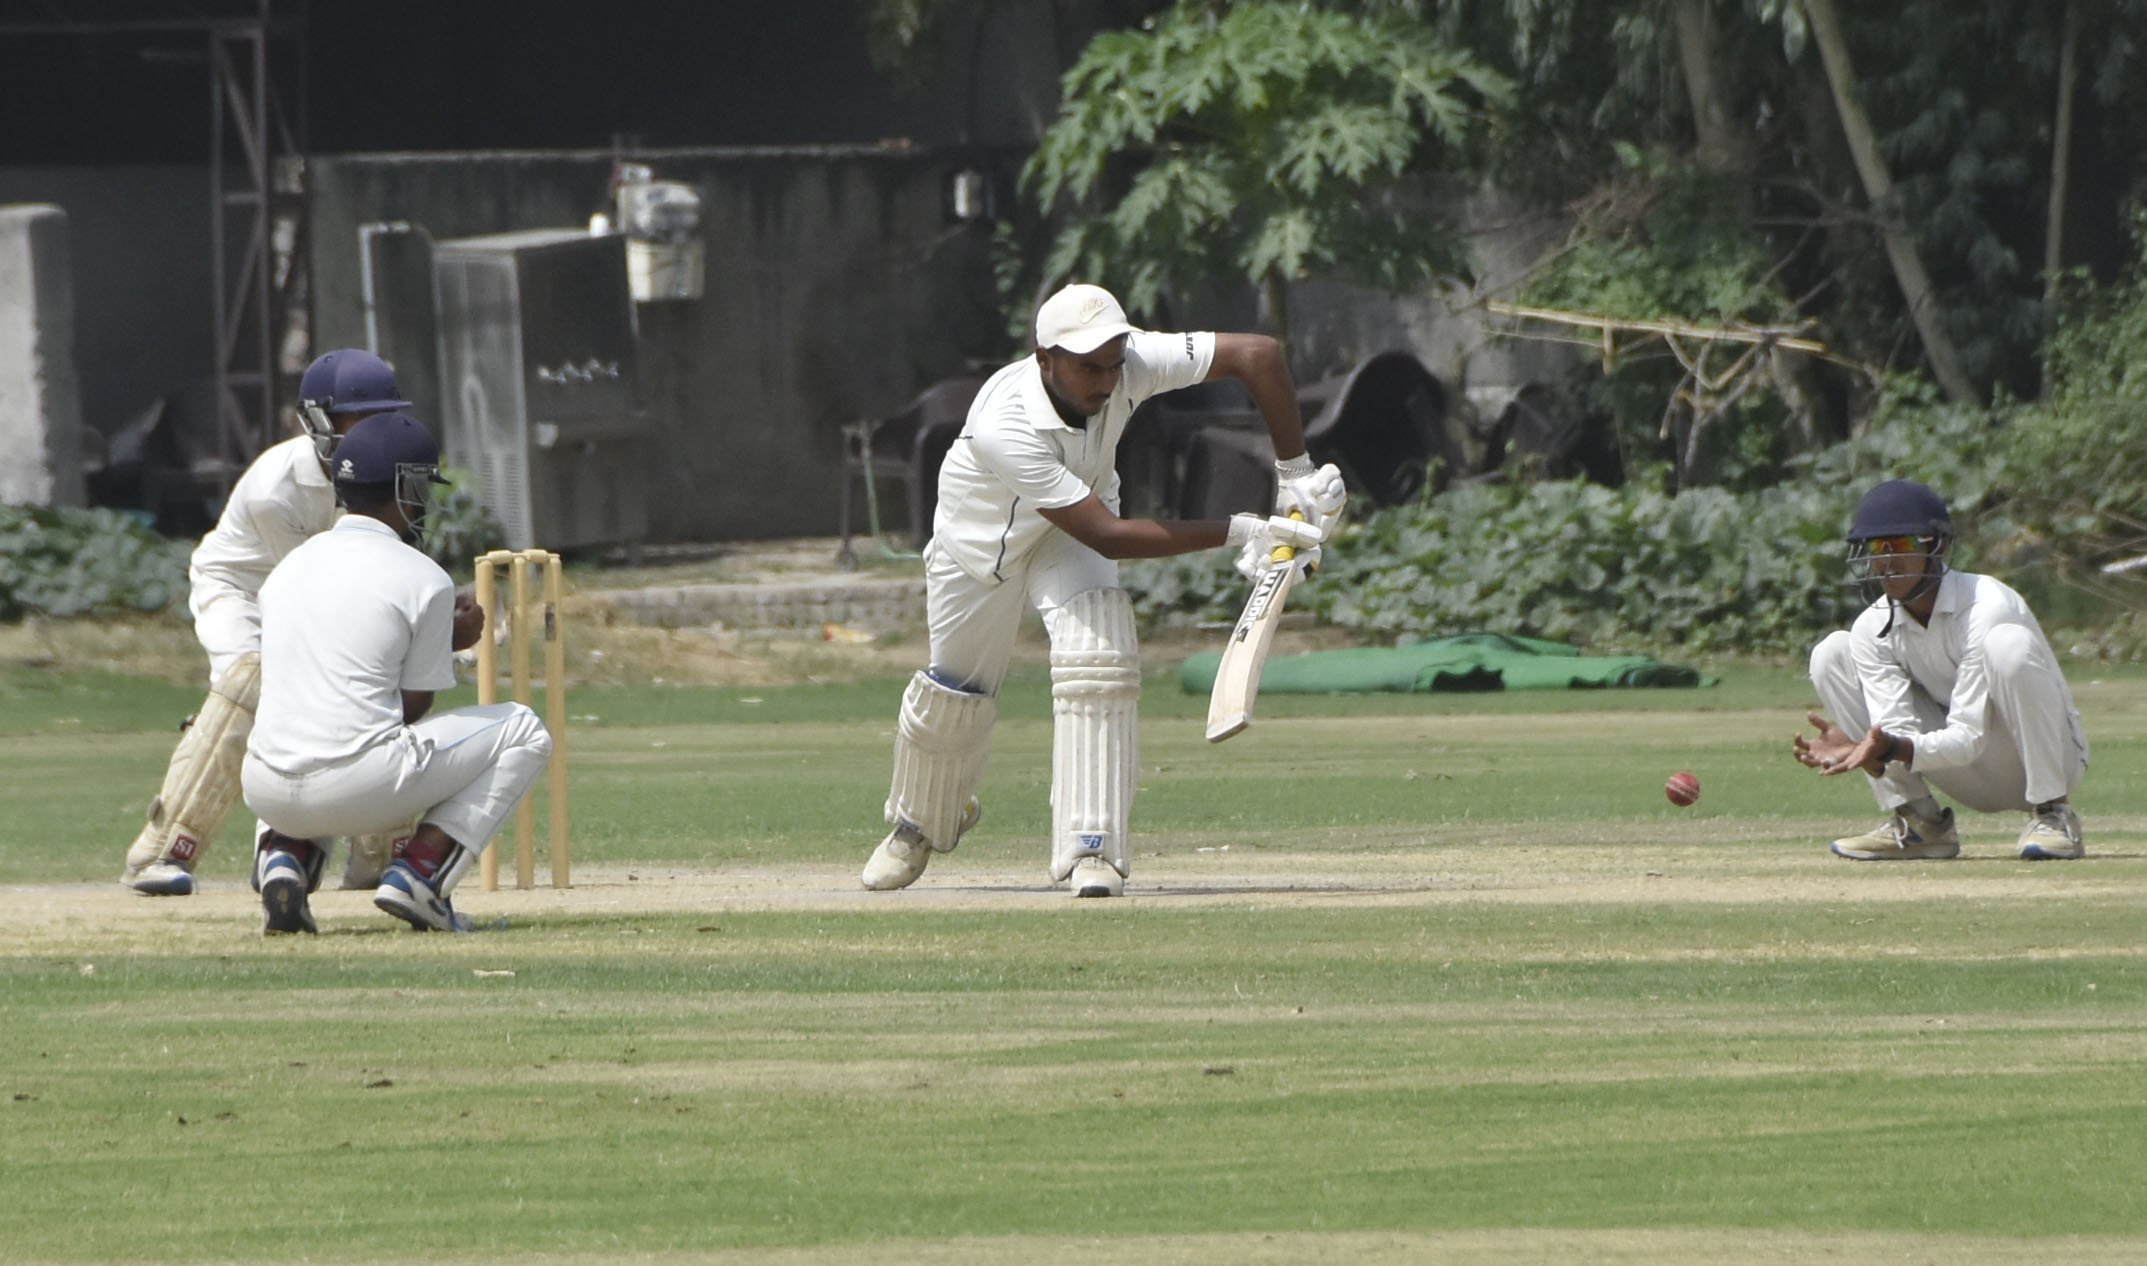 Innings victory for Ludhiana